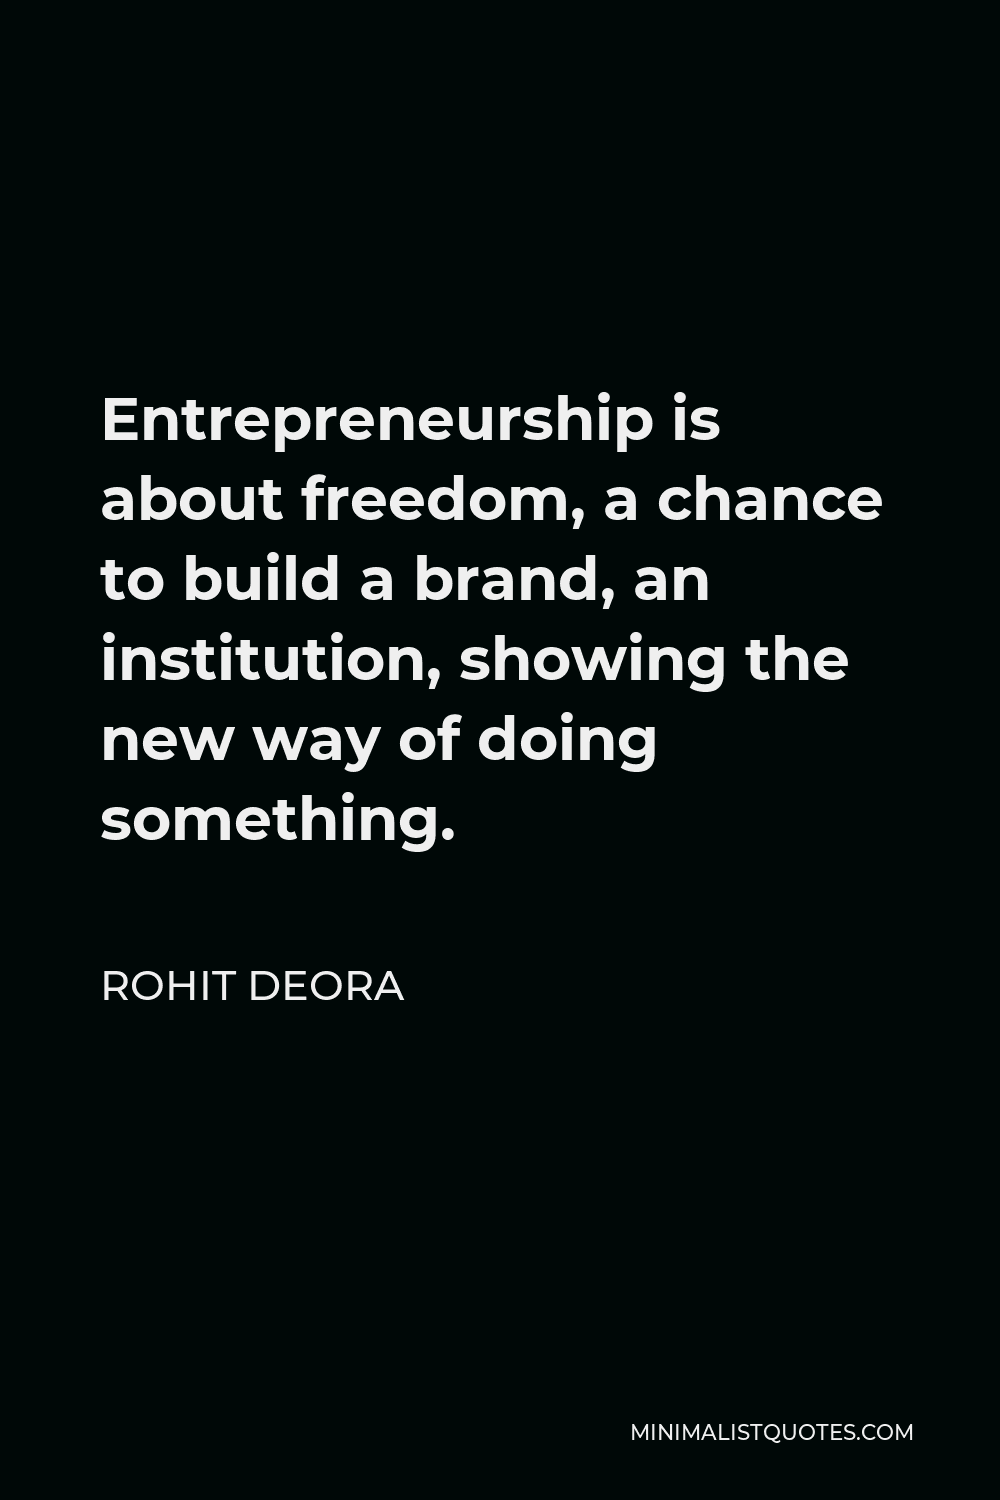 Rohit Deora Quote - Entrepreneurship is about freedom, a chance to build a brand, an institution, showing the new way of doing something.